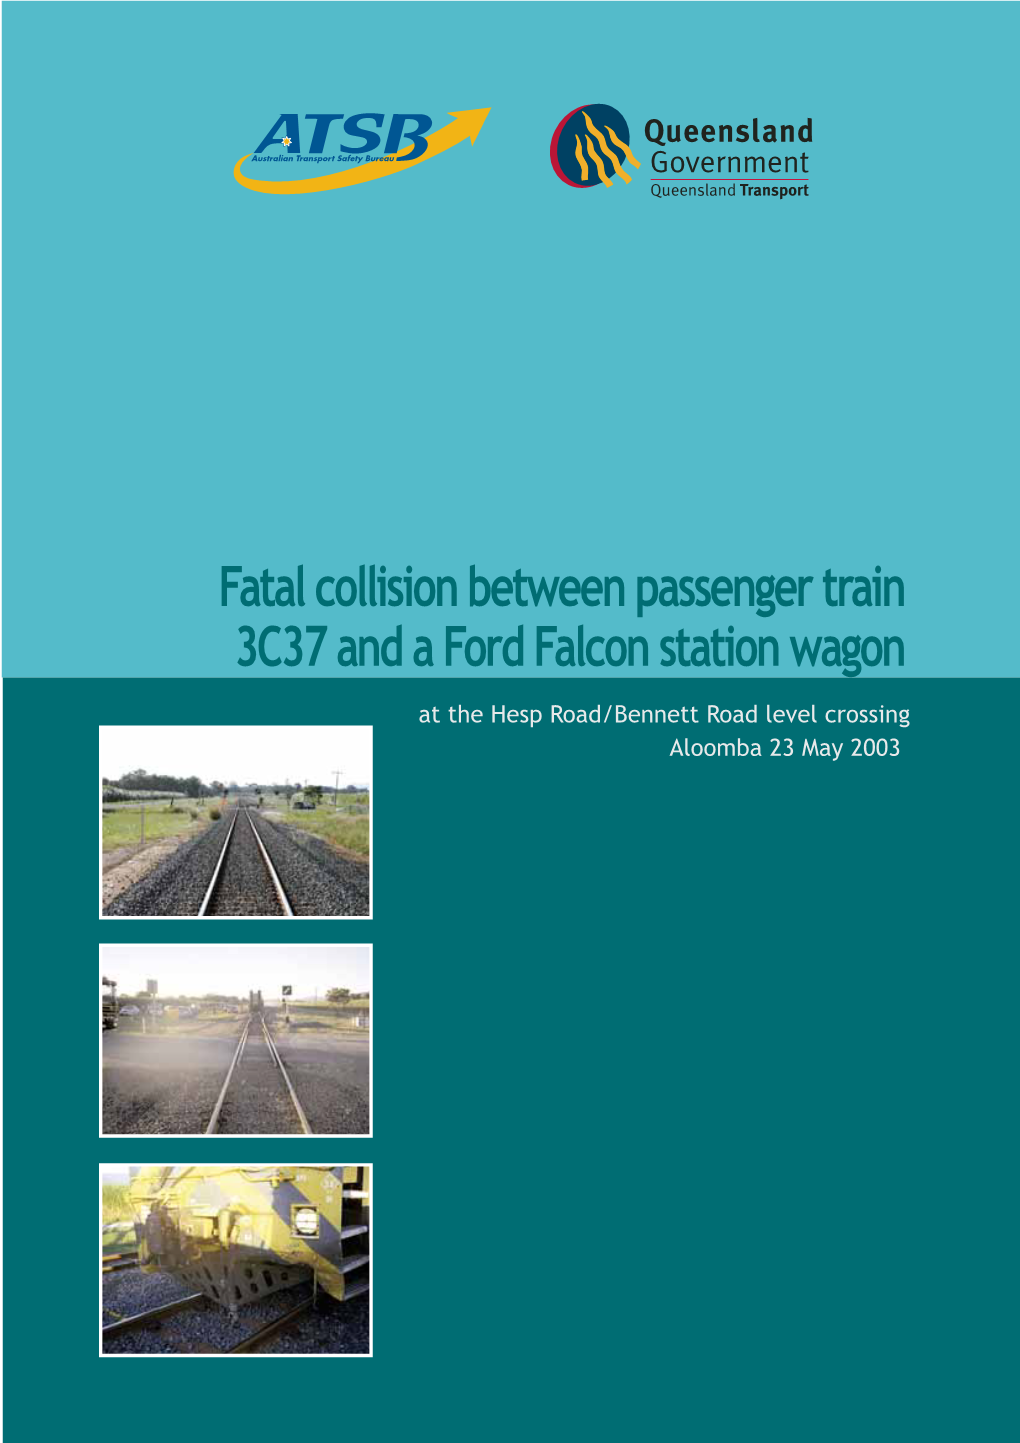 Fatal Collision Between Passenger Train 3C37 and a Ford Falcon Station Wagon